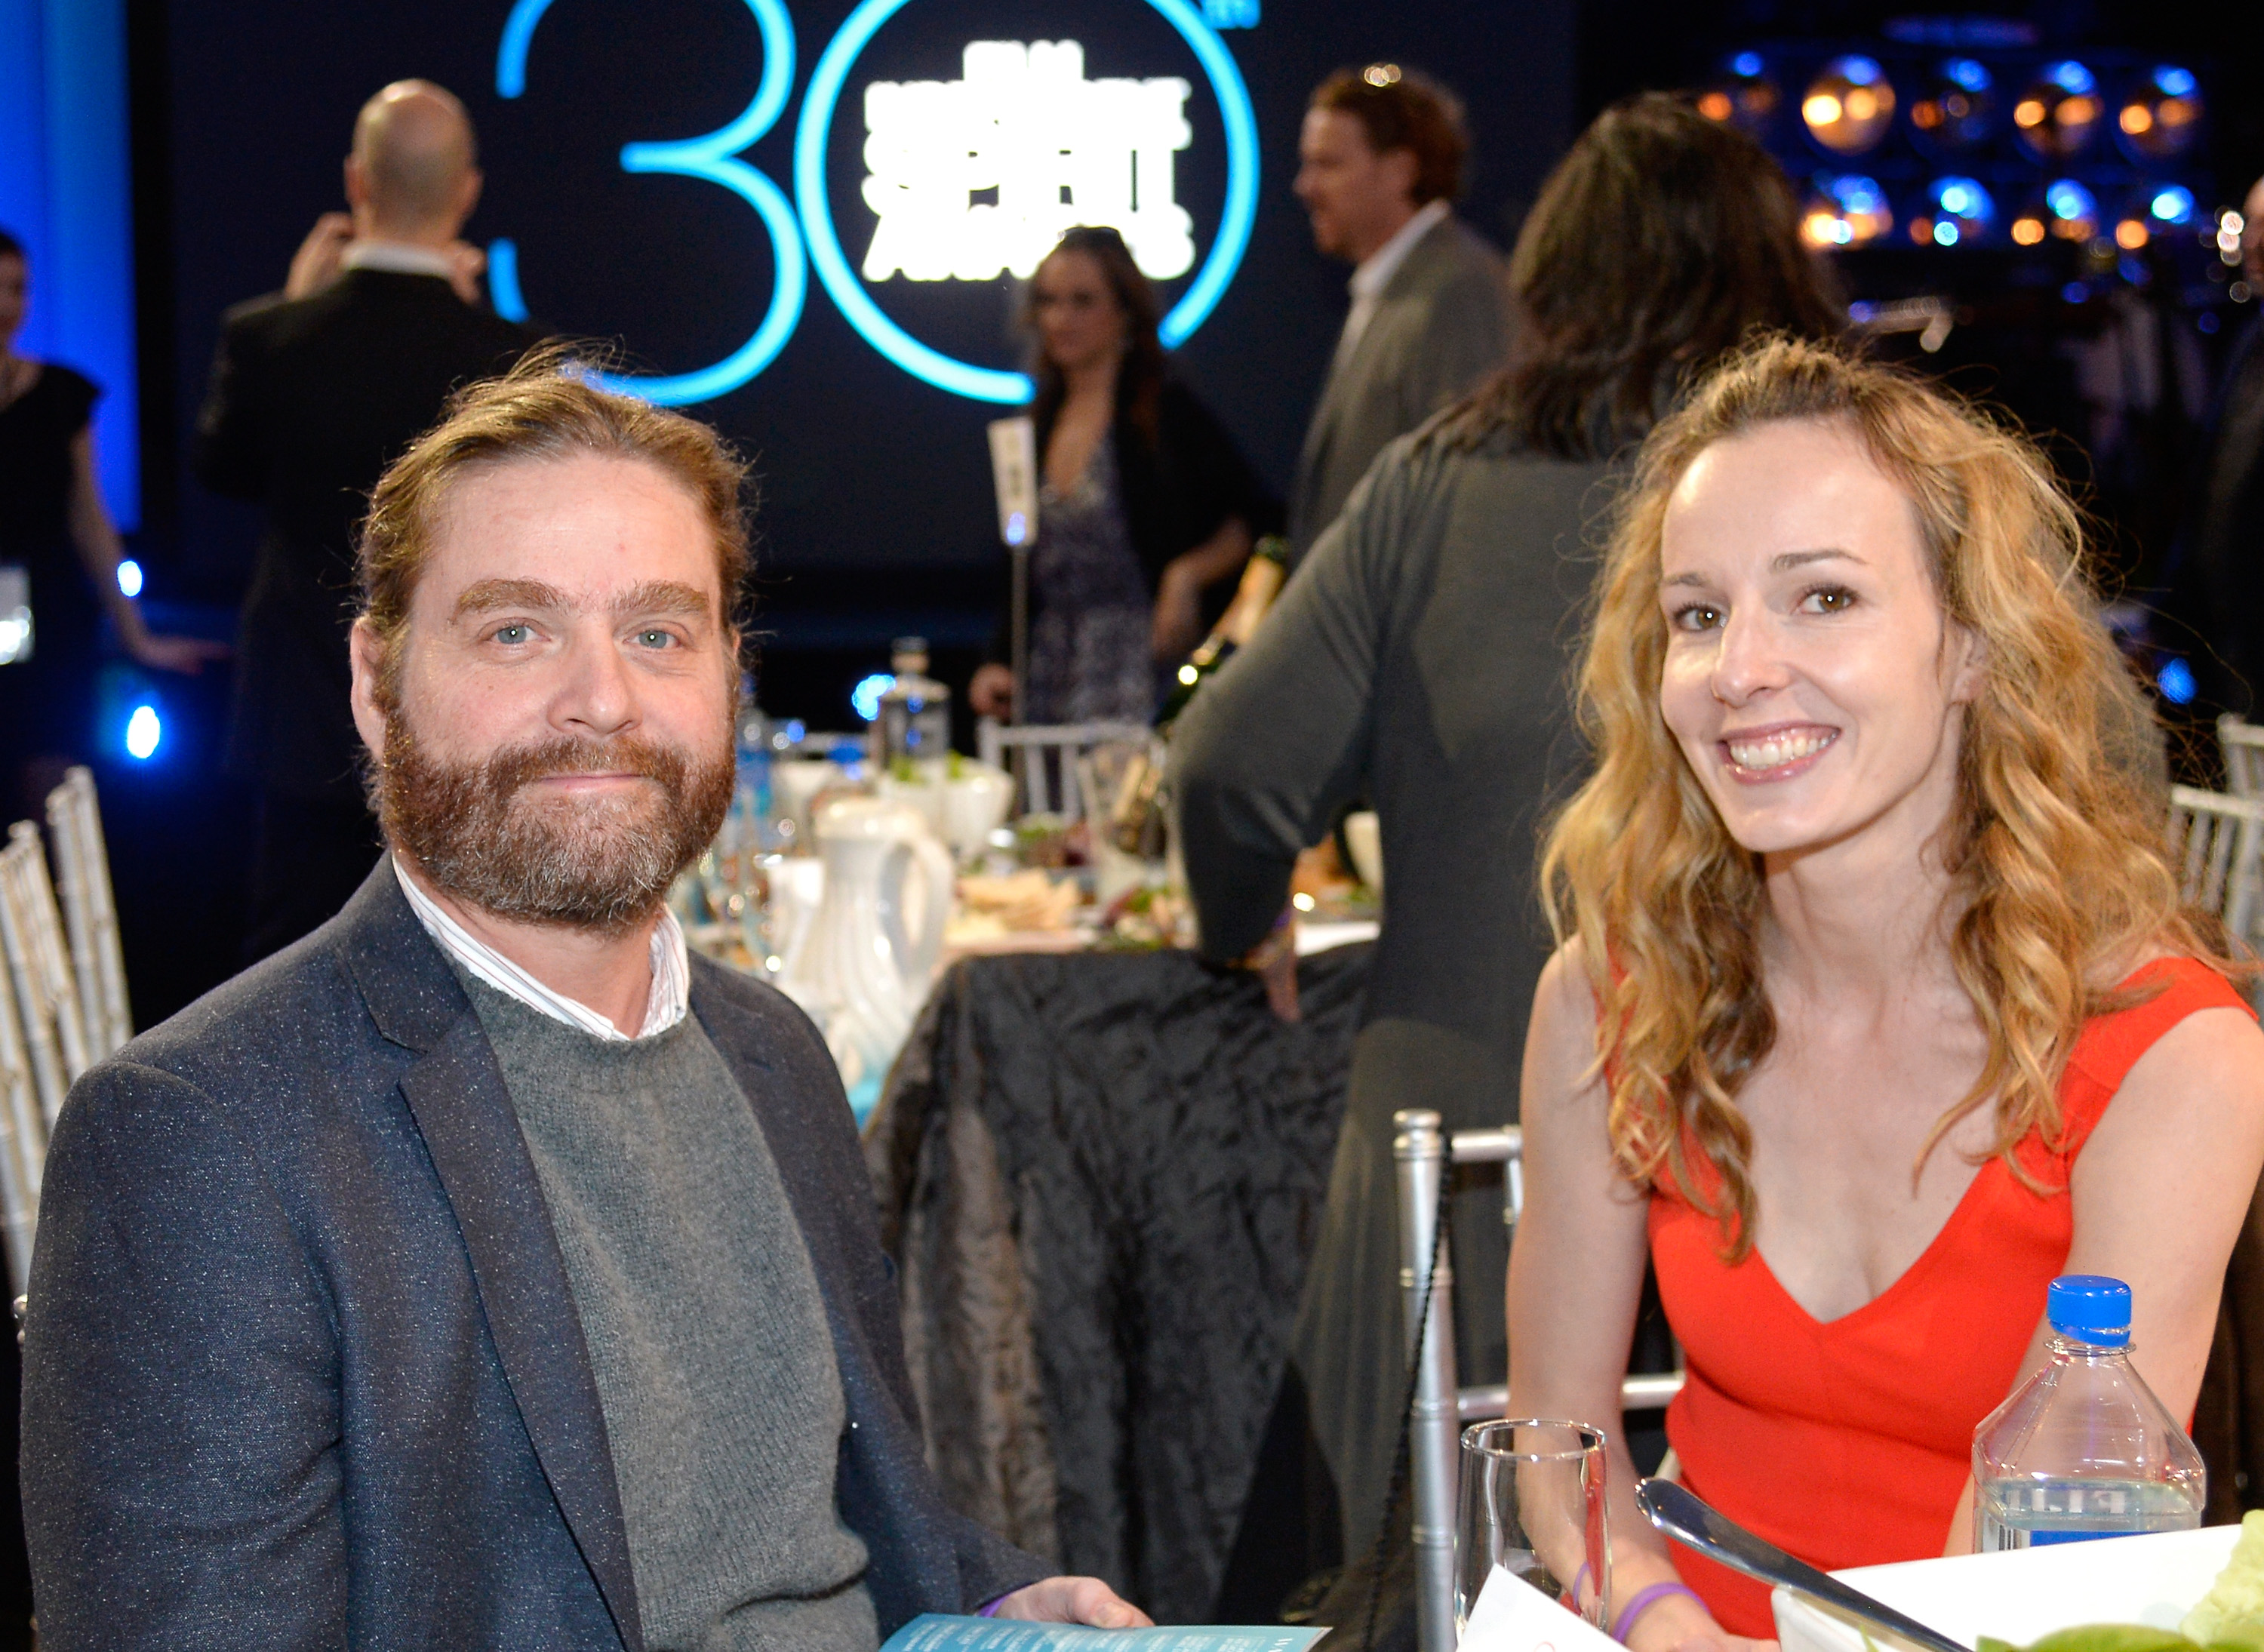 Zach Galifianakis and Quinn Lundberg attend the 2015 Film Independent Spirit Awards at Santa Monica Beach on February 21, 2015, in California. | Source: Getty Images